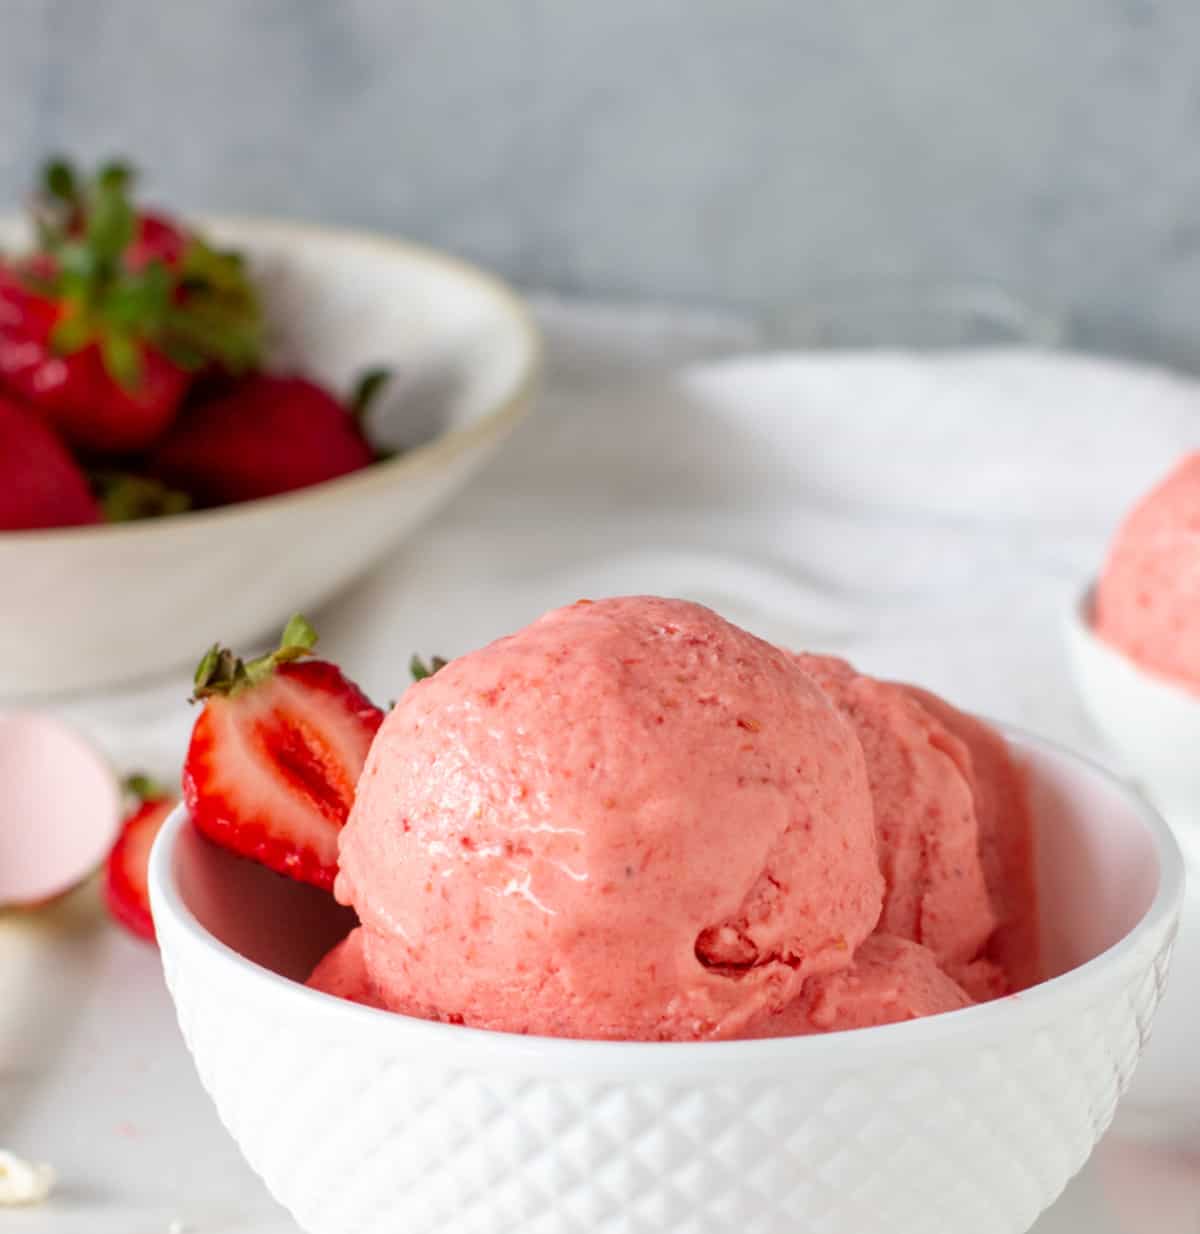 Scoops of strawberry ice cream in white bowl, strawberries beneath, a grey background